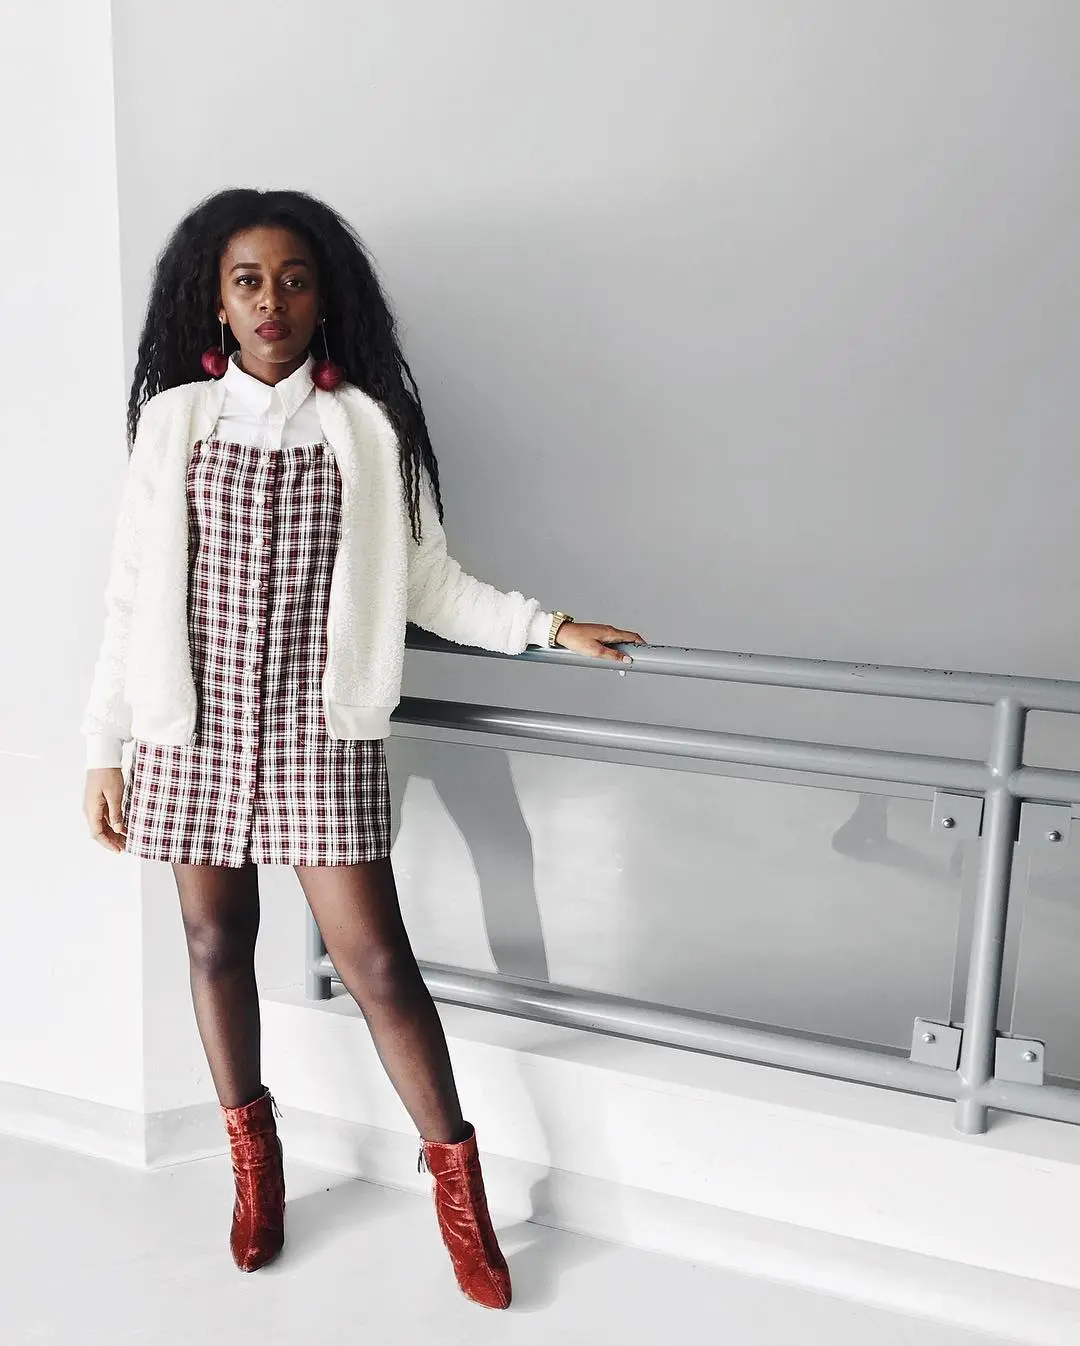 natural hair, red boots, winter fashion